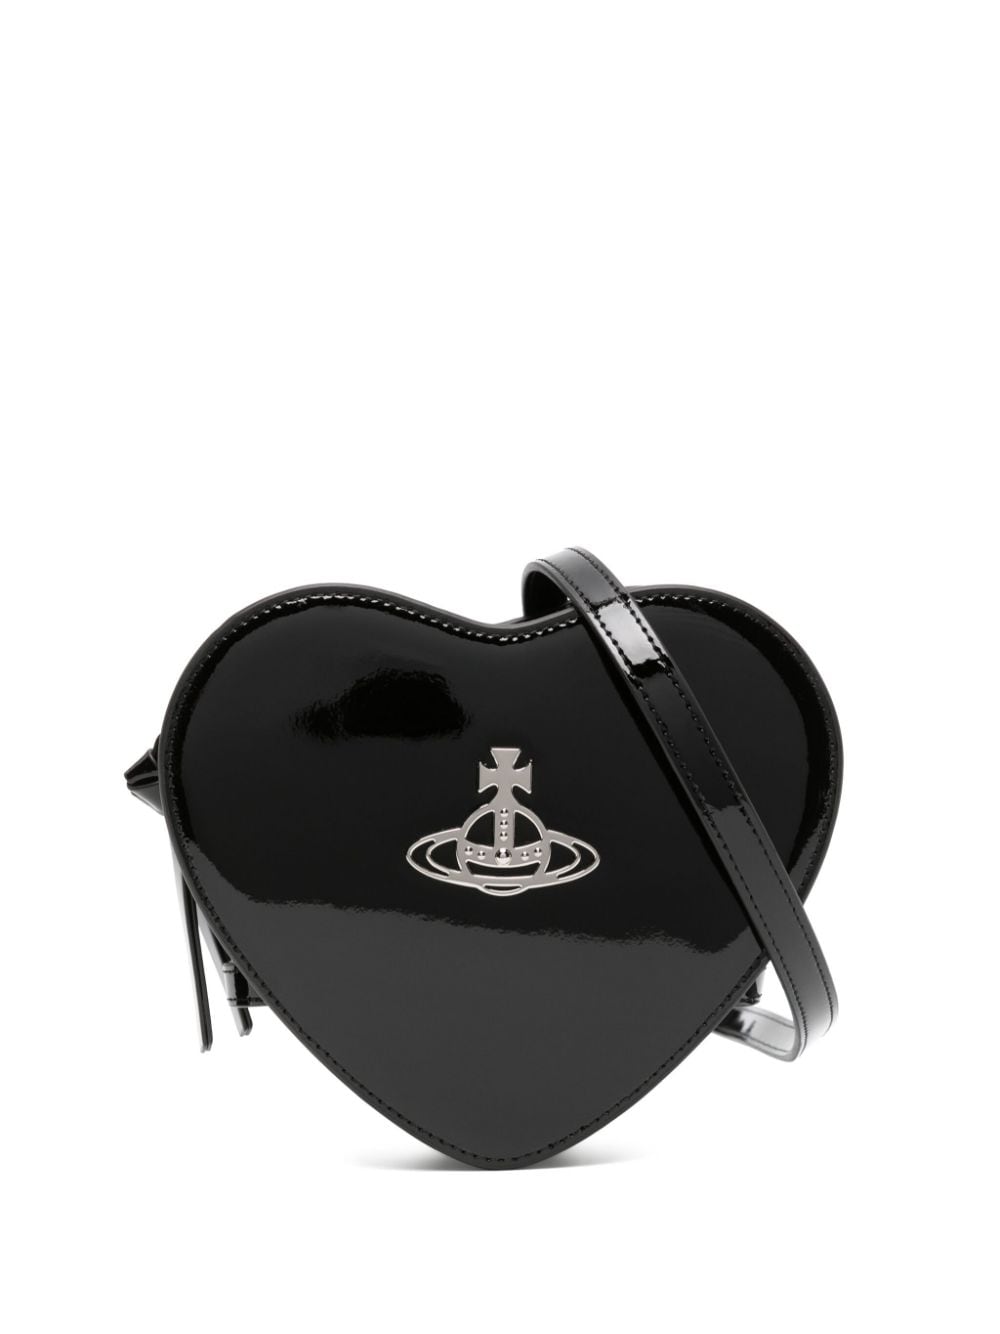 Louise Heart leather bag